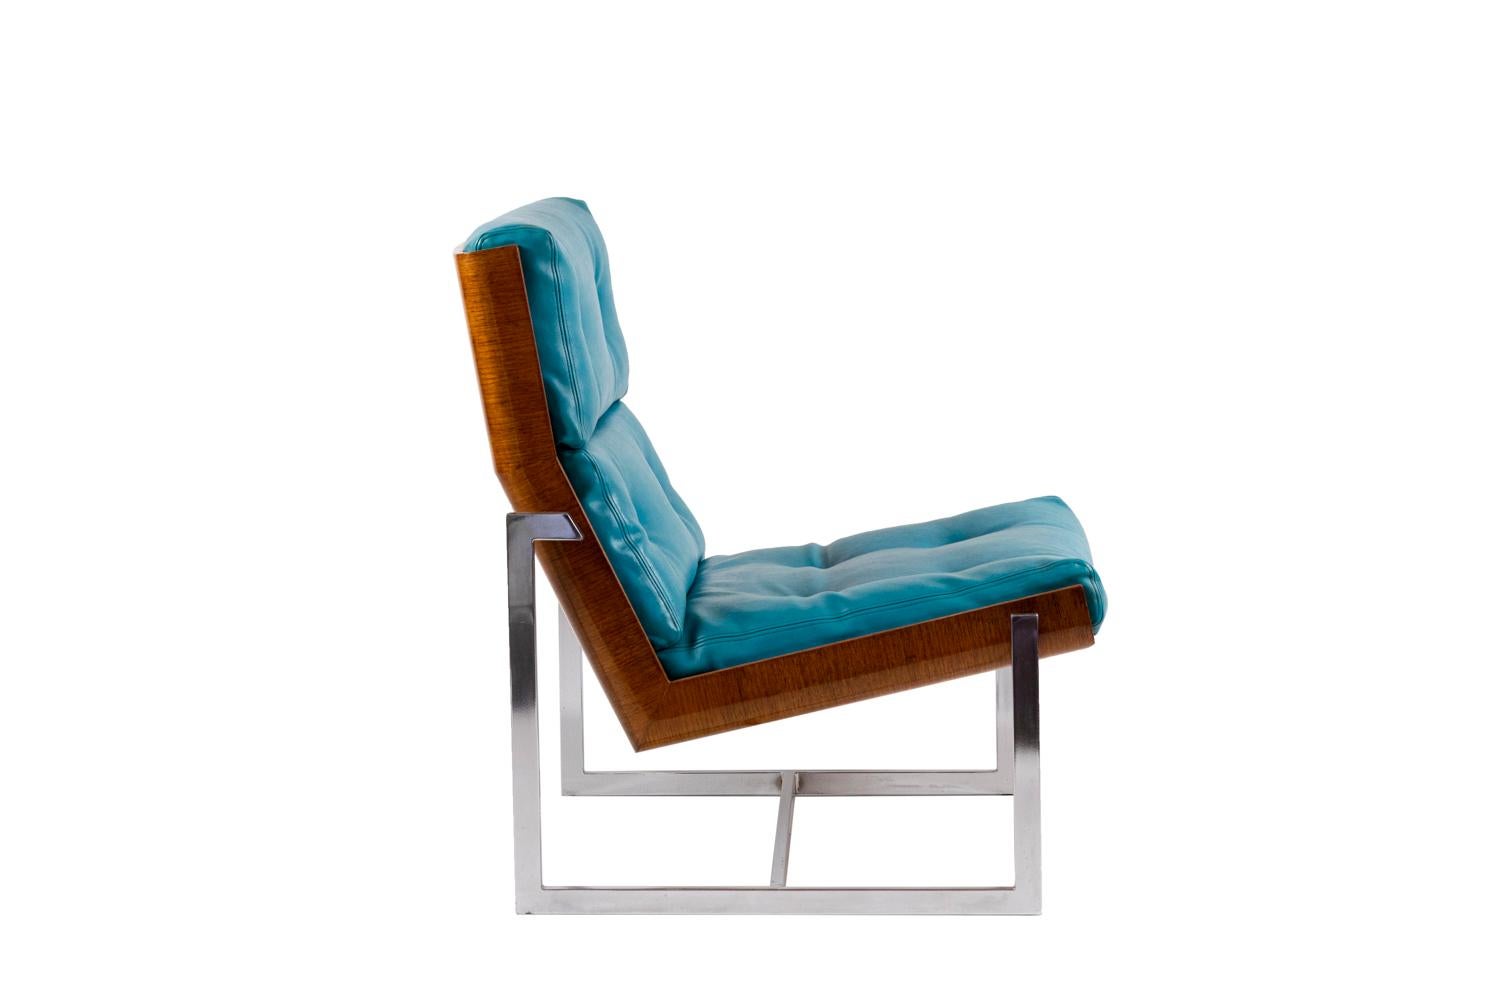 European William Plunkett, Pair of Armchairs in Blue Leather and Plywood, 1970s